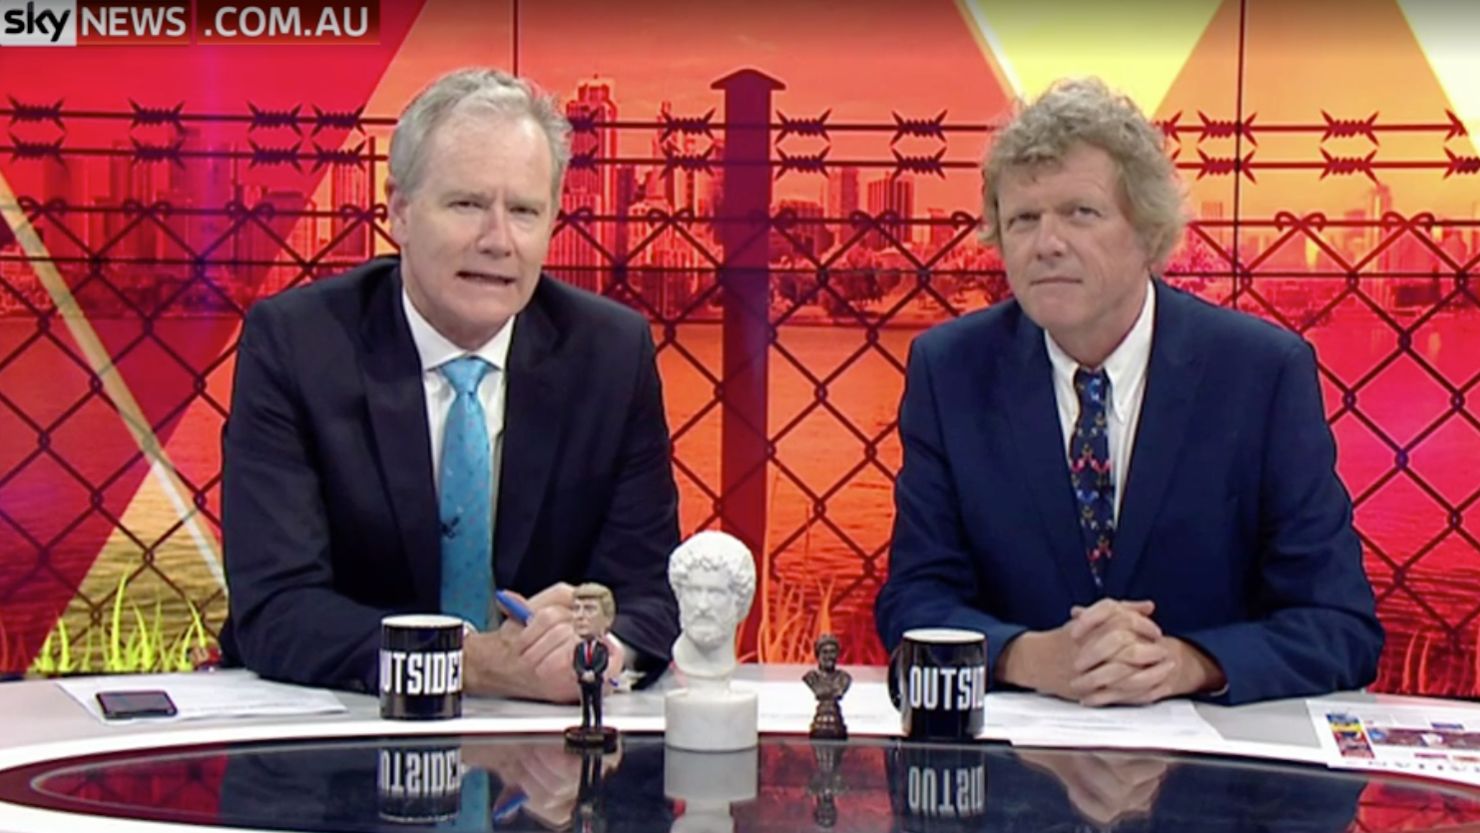 A screenshot of former Sky News host Ross Cameron (left) in October on his television show Outsiders.